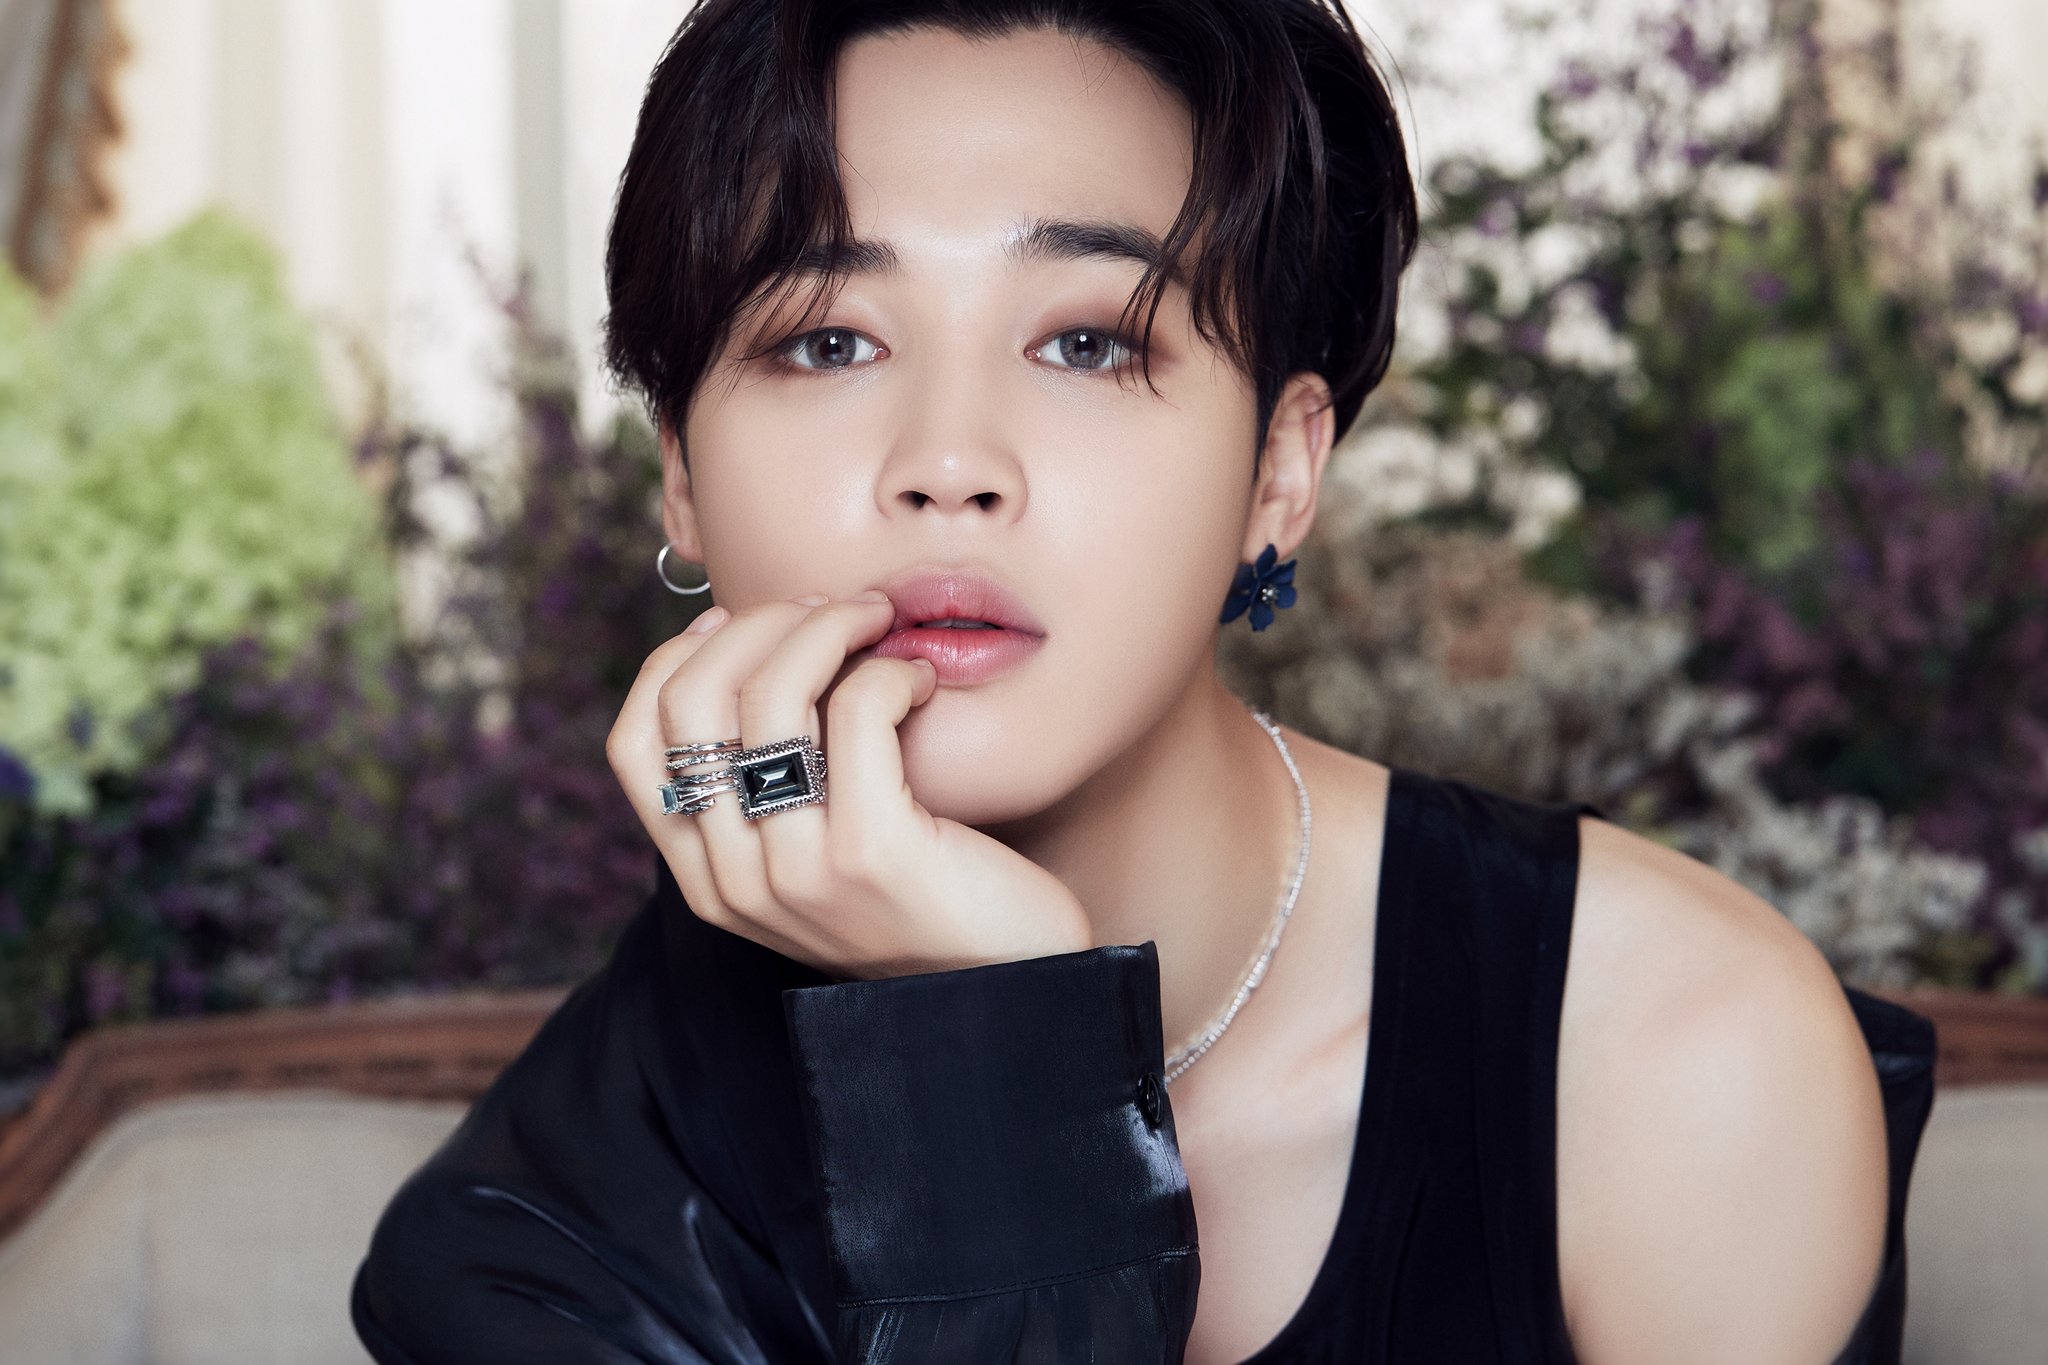 5 Takeaways From Jimin's Debut EP, 'FACE'